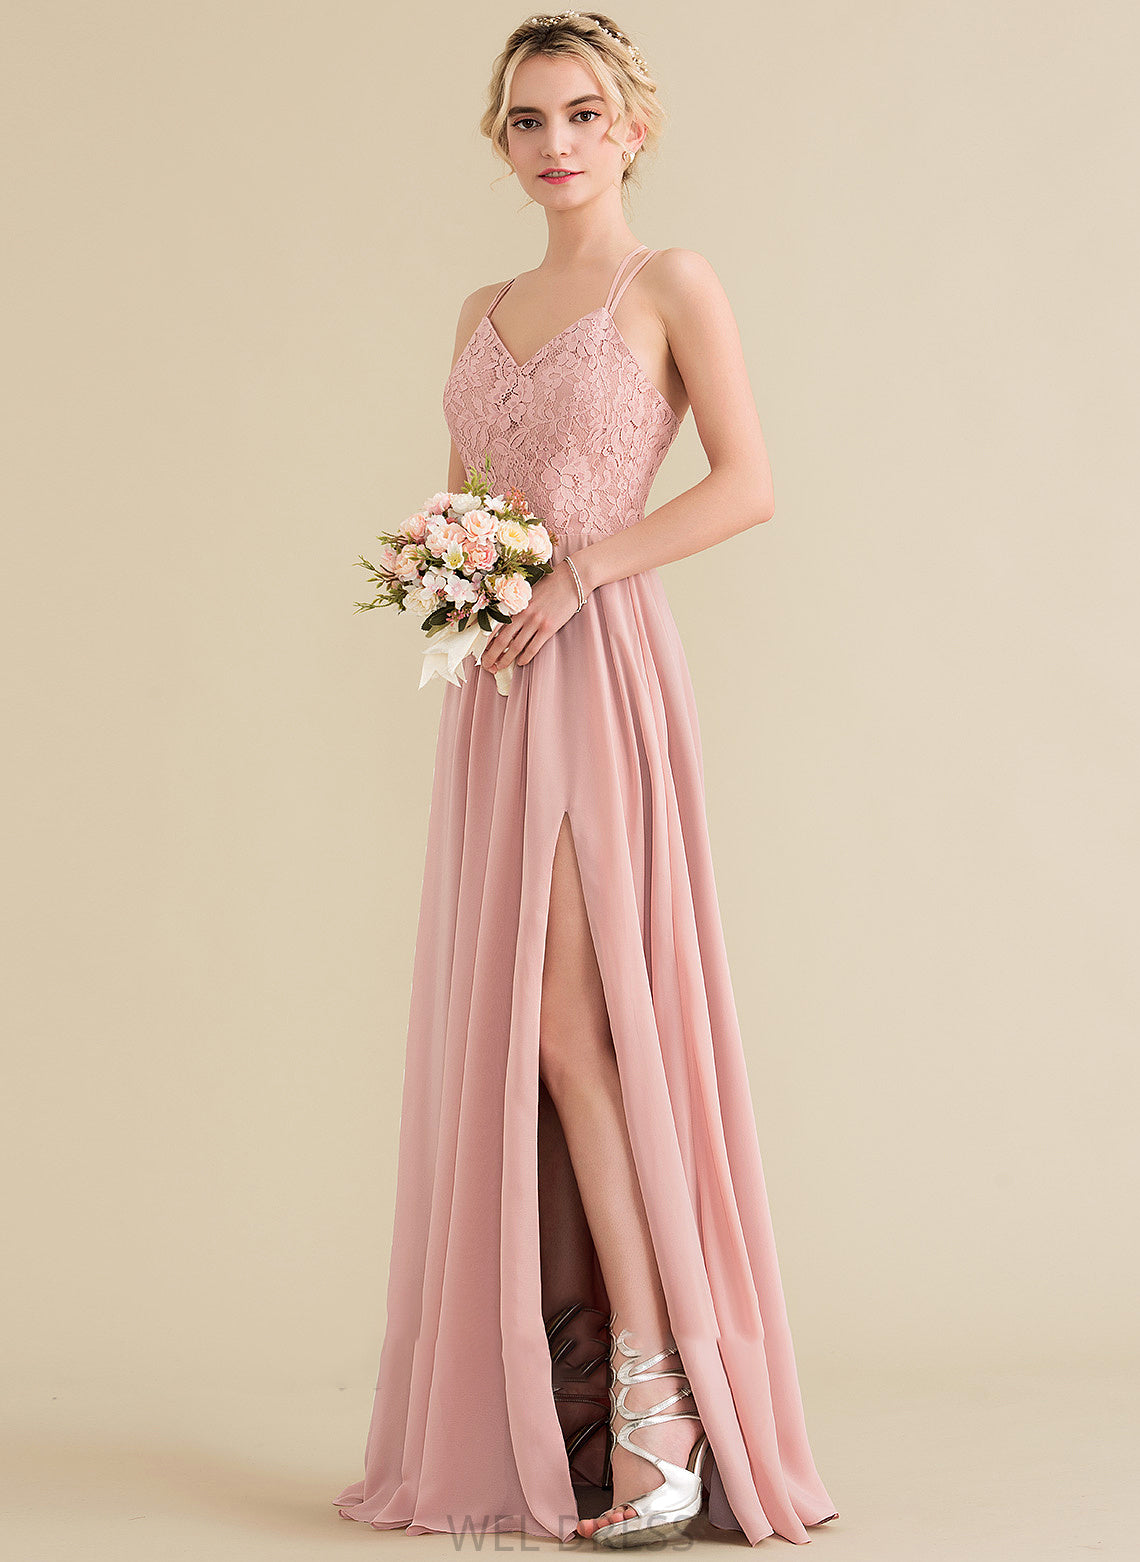 With Front Joselyn Split Prom Dresses Chiffon Floor-Length A-Line Lace Sweetheart